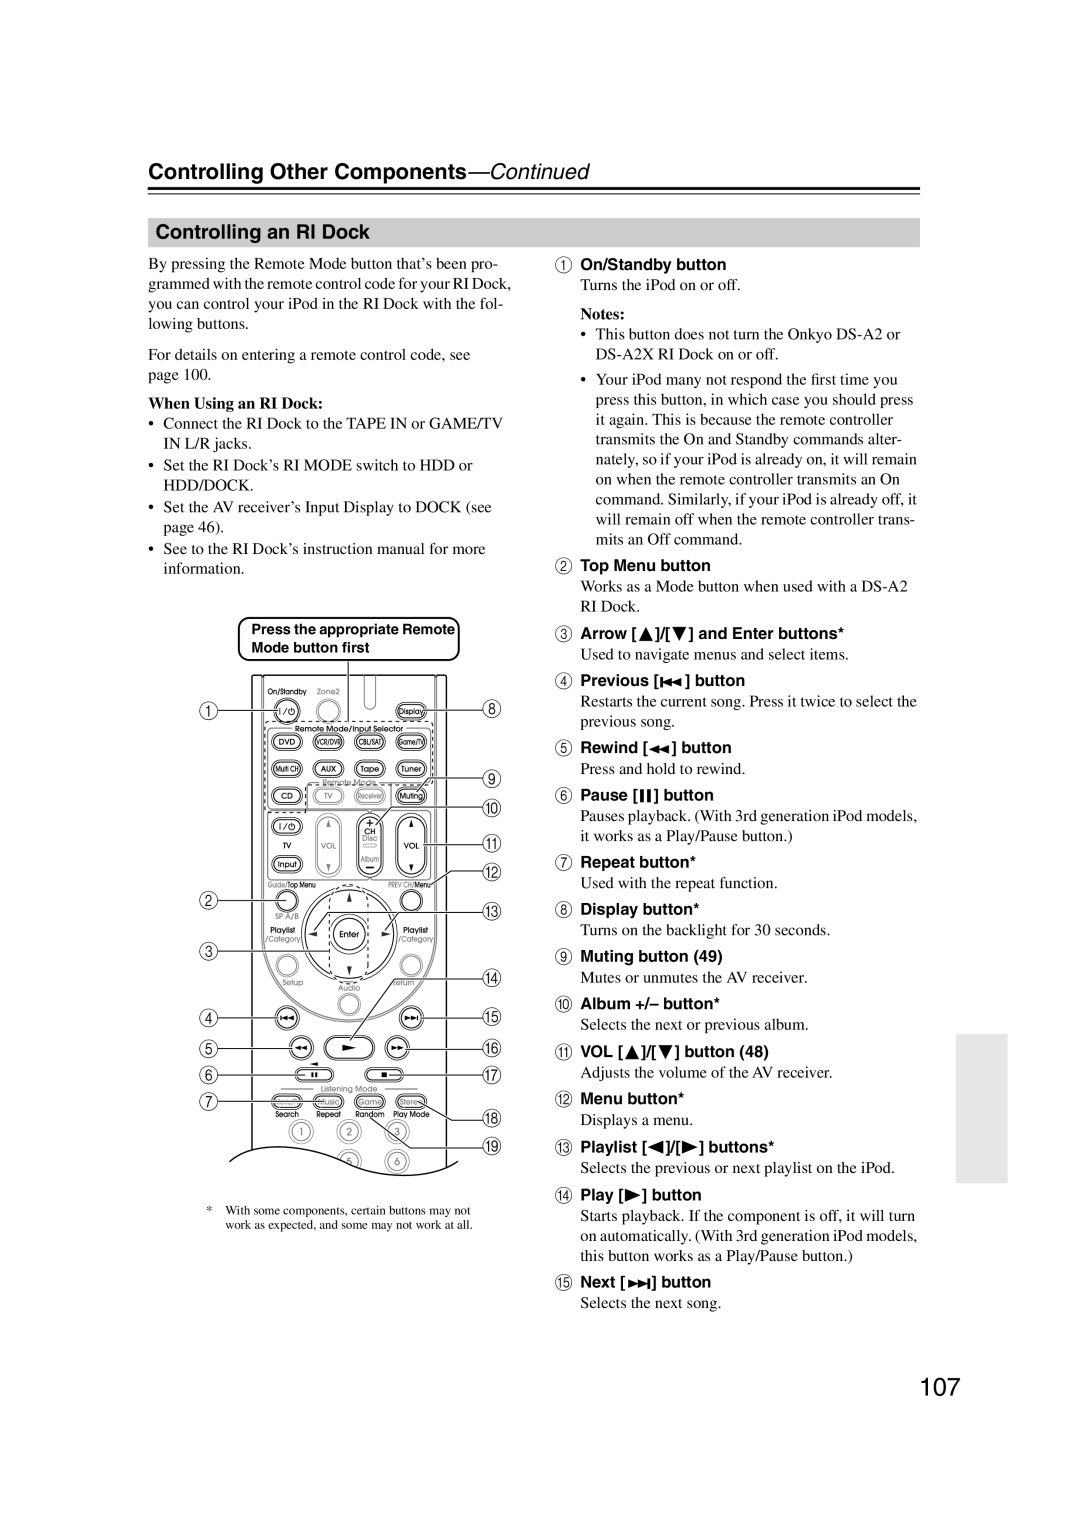 Integra DTR-5.9 instruction manual Controlling an RI Dock, Controlling Other Components—Continued 